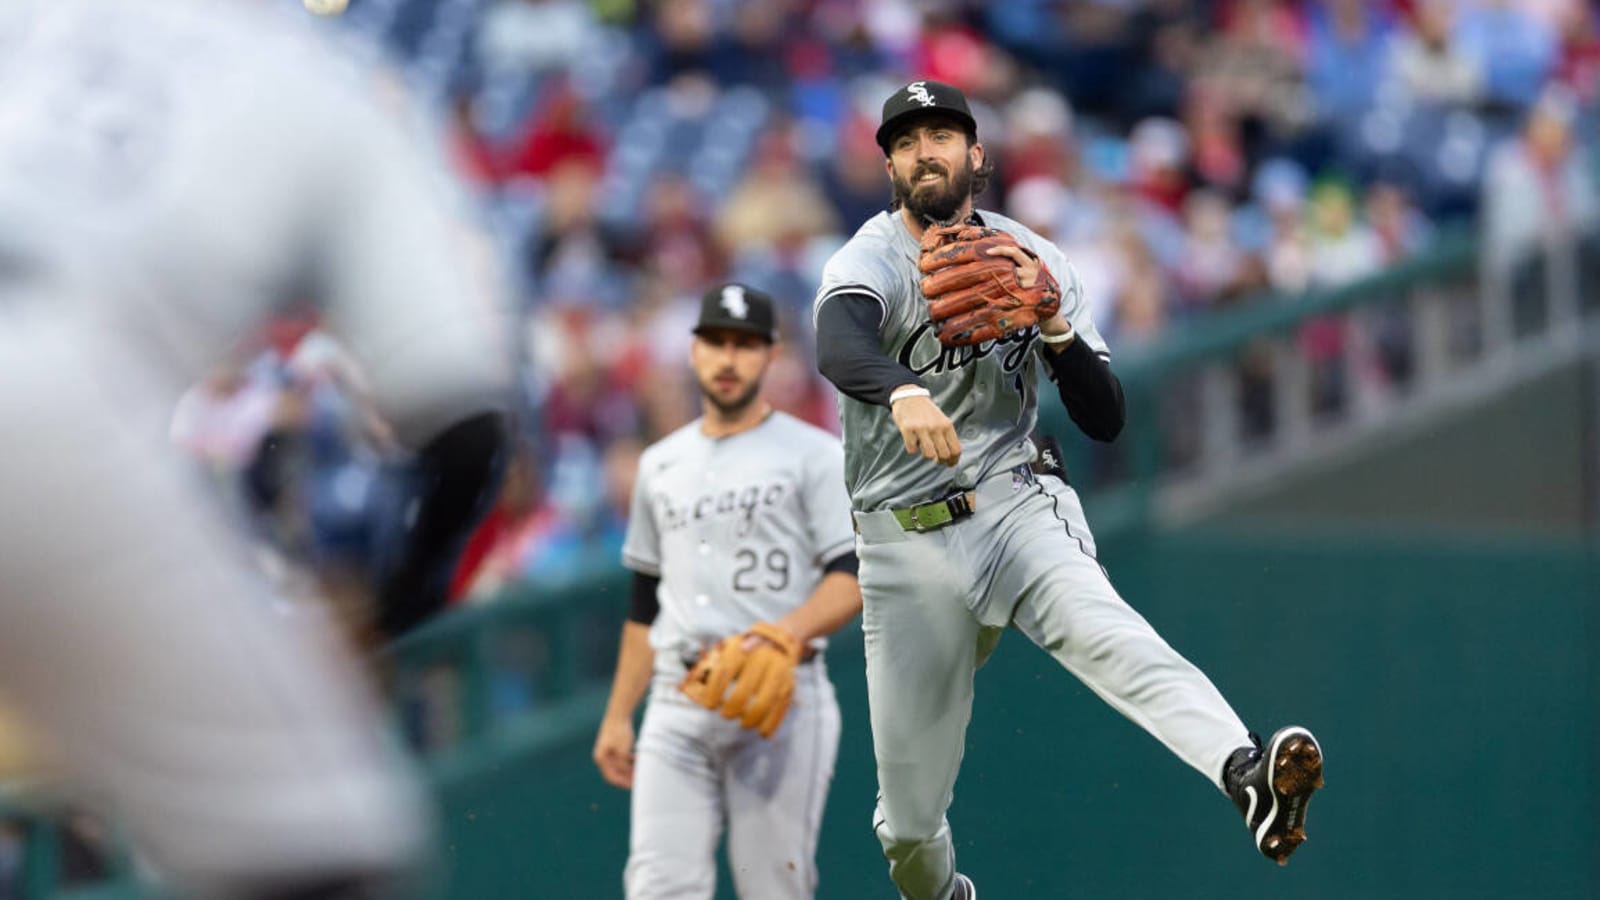 White Sox Shut Out for Seventh Time, Lose 7-0 to Phillies in Another Offensive Misfire